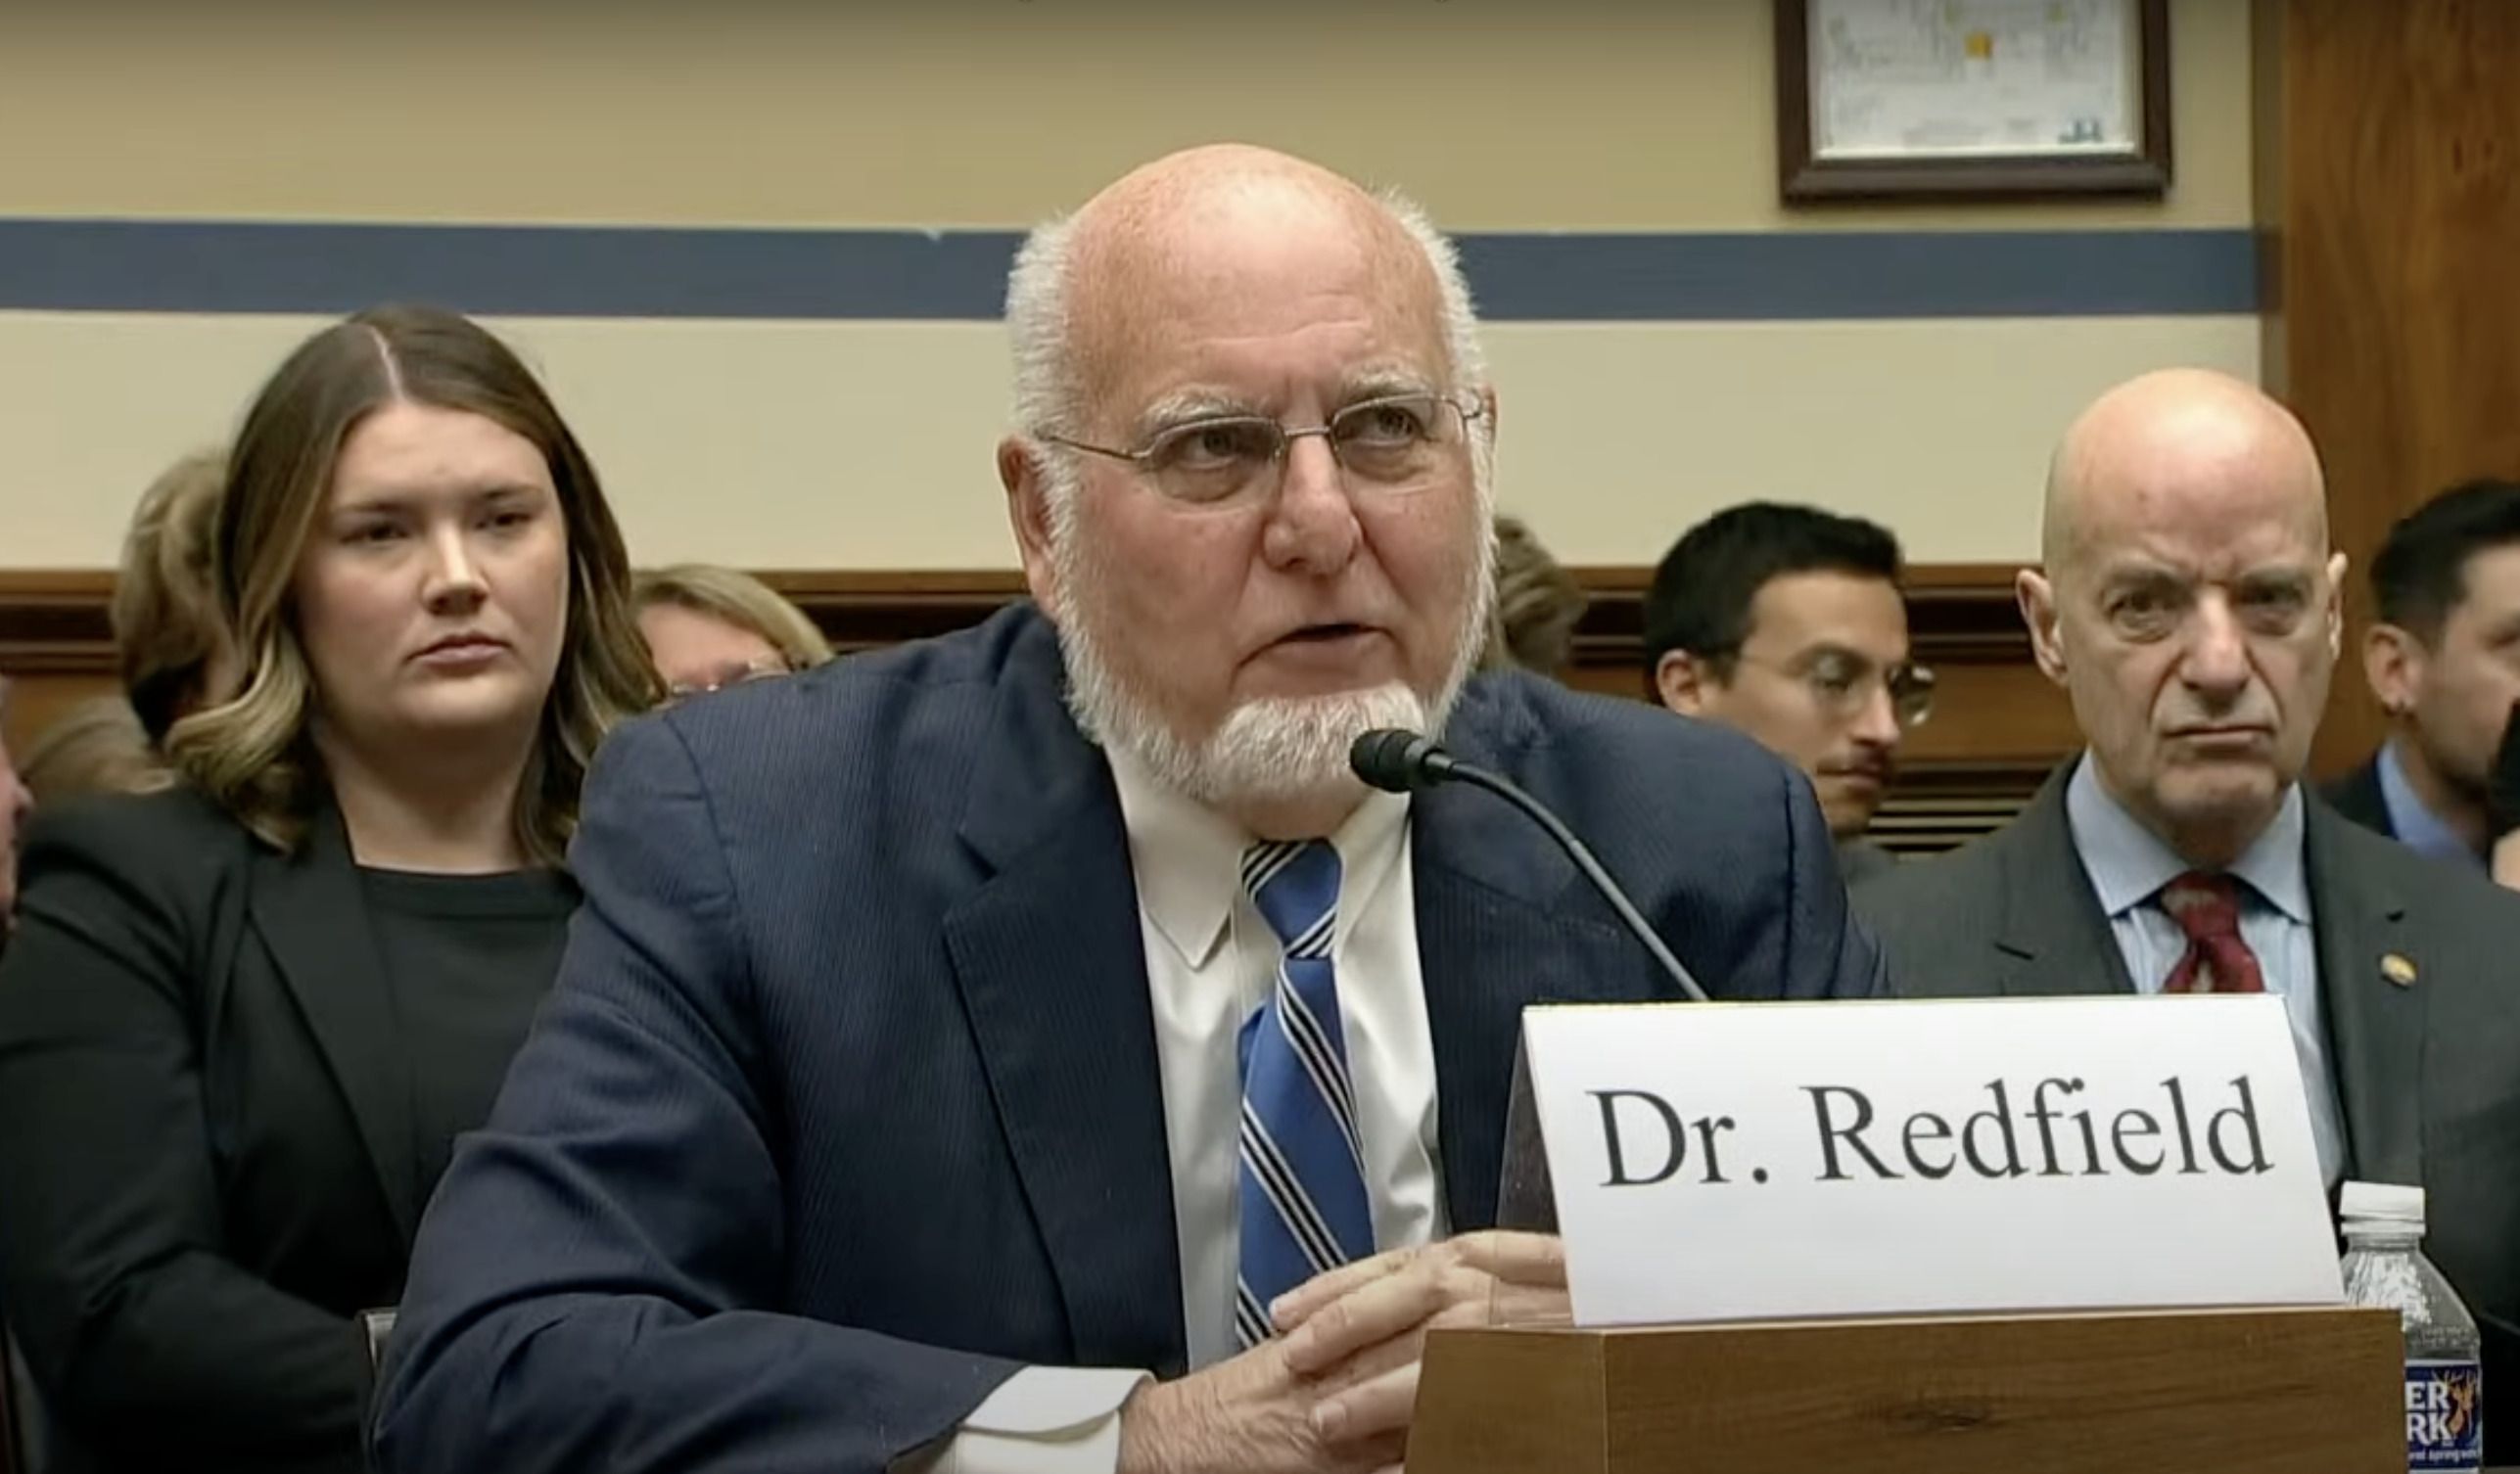 WATCH: Former CDC Director Issues Chilling Warning